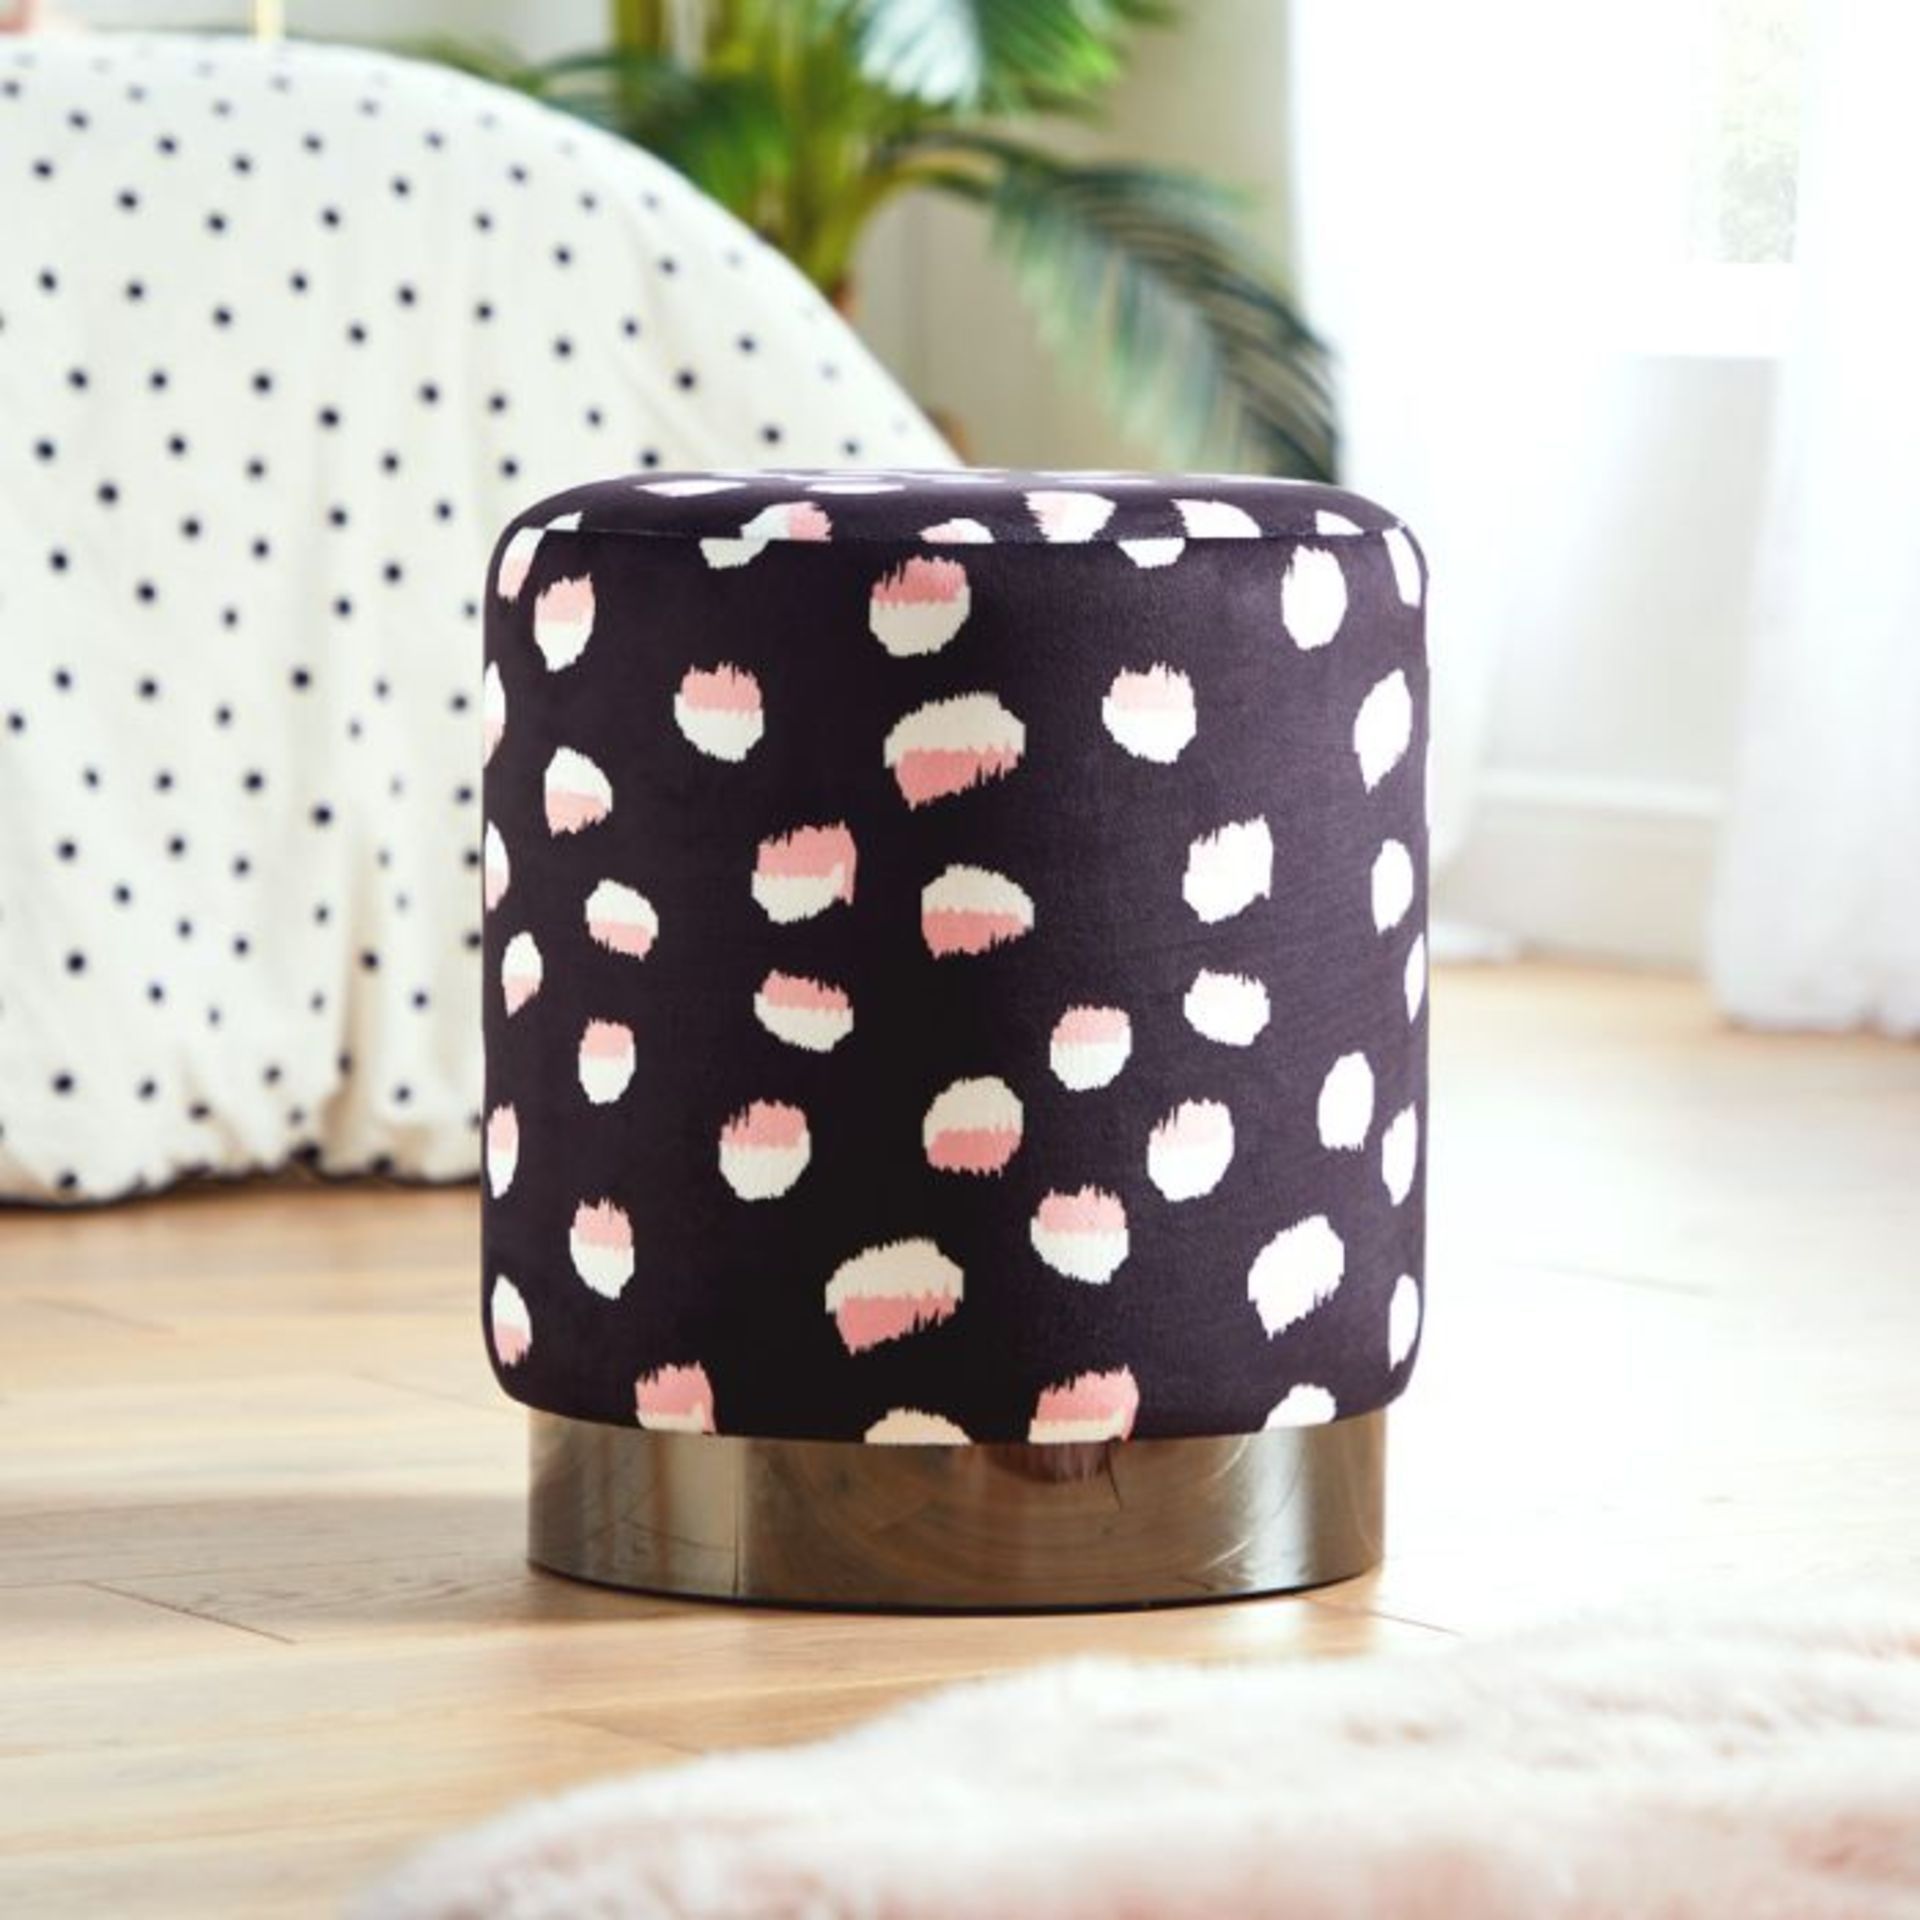 4 X NEW & BOXED BEAUTIFY SAKURA FLORAL FOOTSTOOL (4000436) RRP £49.99 EACH. FINISHED IN A JAPANESE